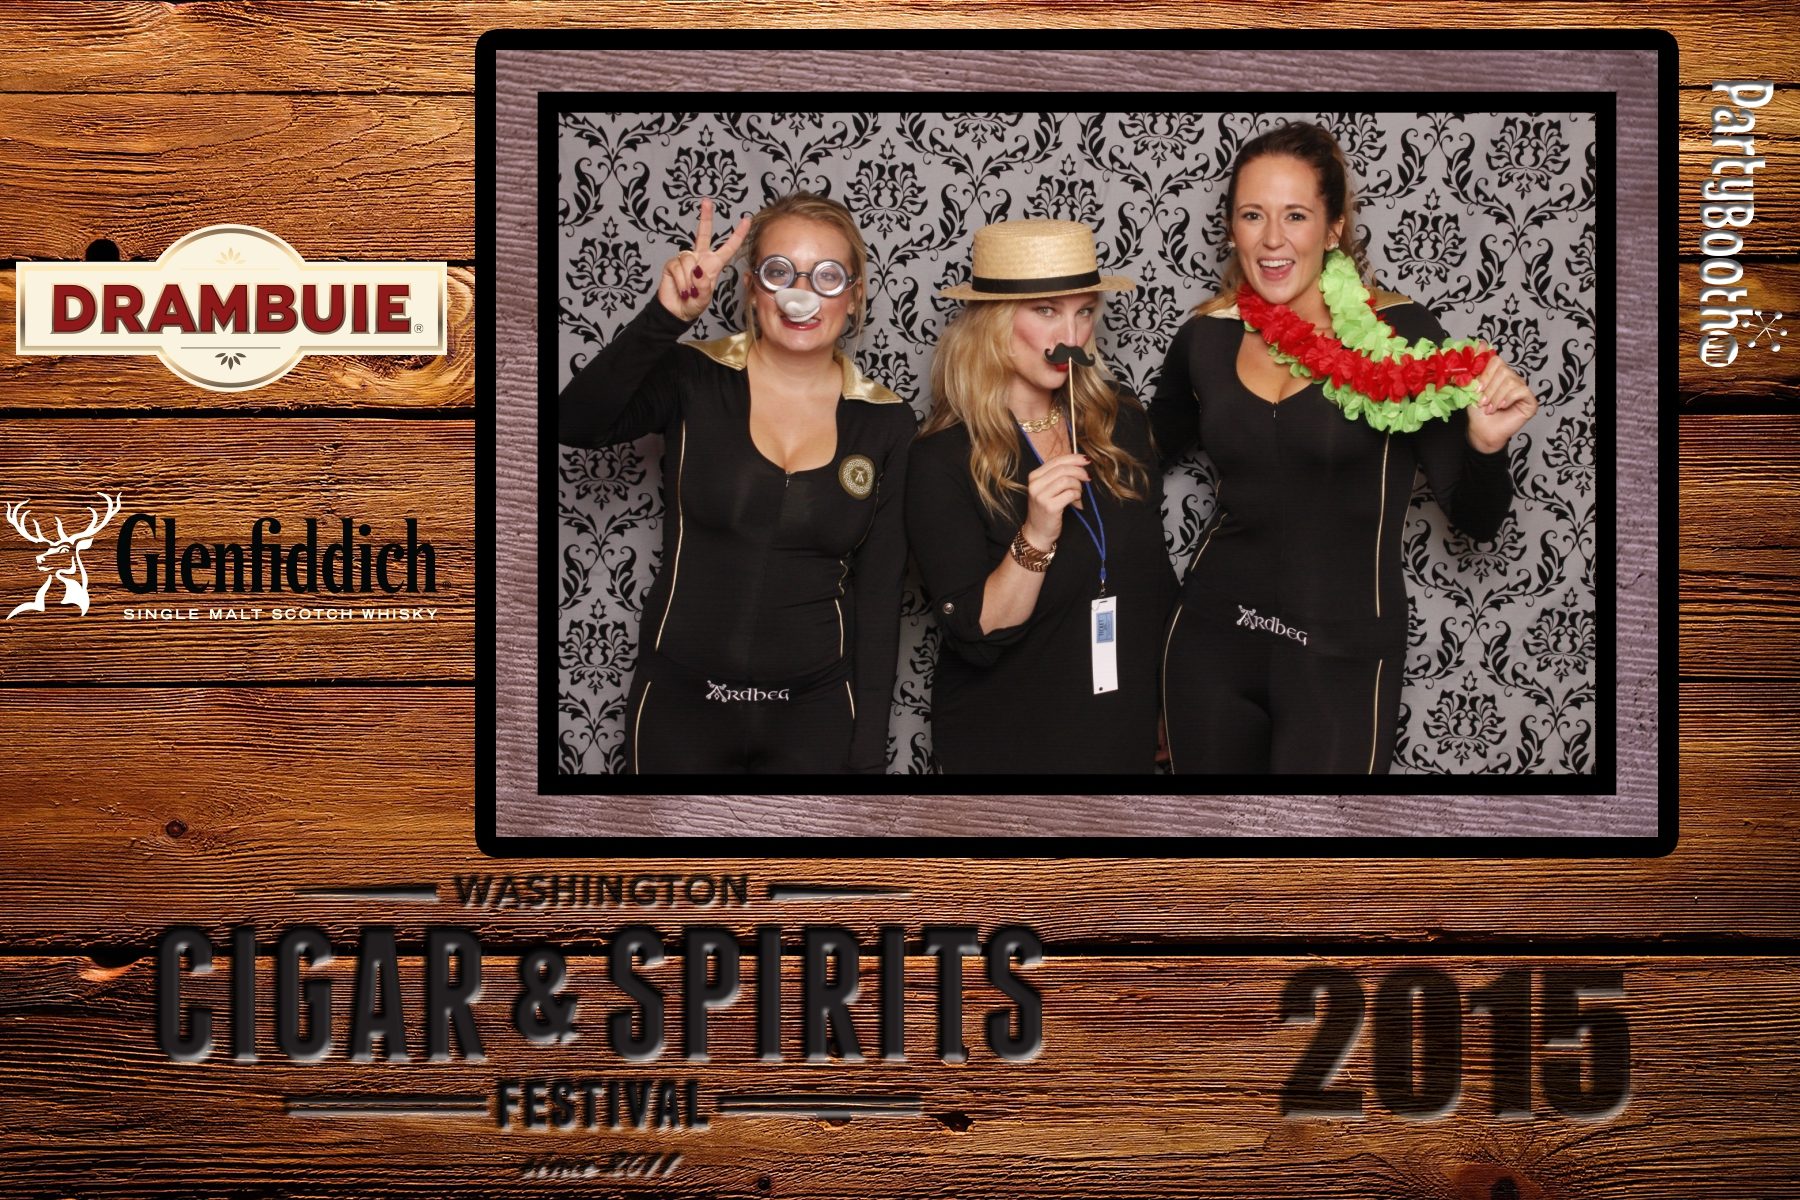 Celebrating the 5th Annual Washington Cigar and Spirits Festival with the Lit Cigar Lounge, Drambuie and Glenfiddich. Snoqualmie Photo Booth ©2015 PartyBoothNW.com - Tonight We PartyBooth!